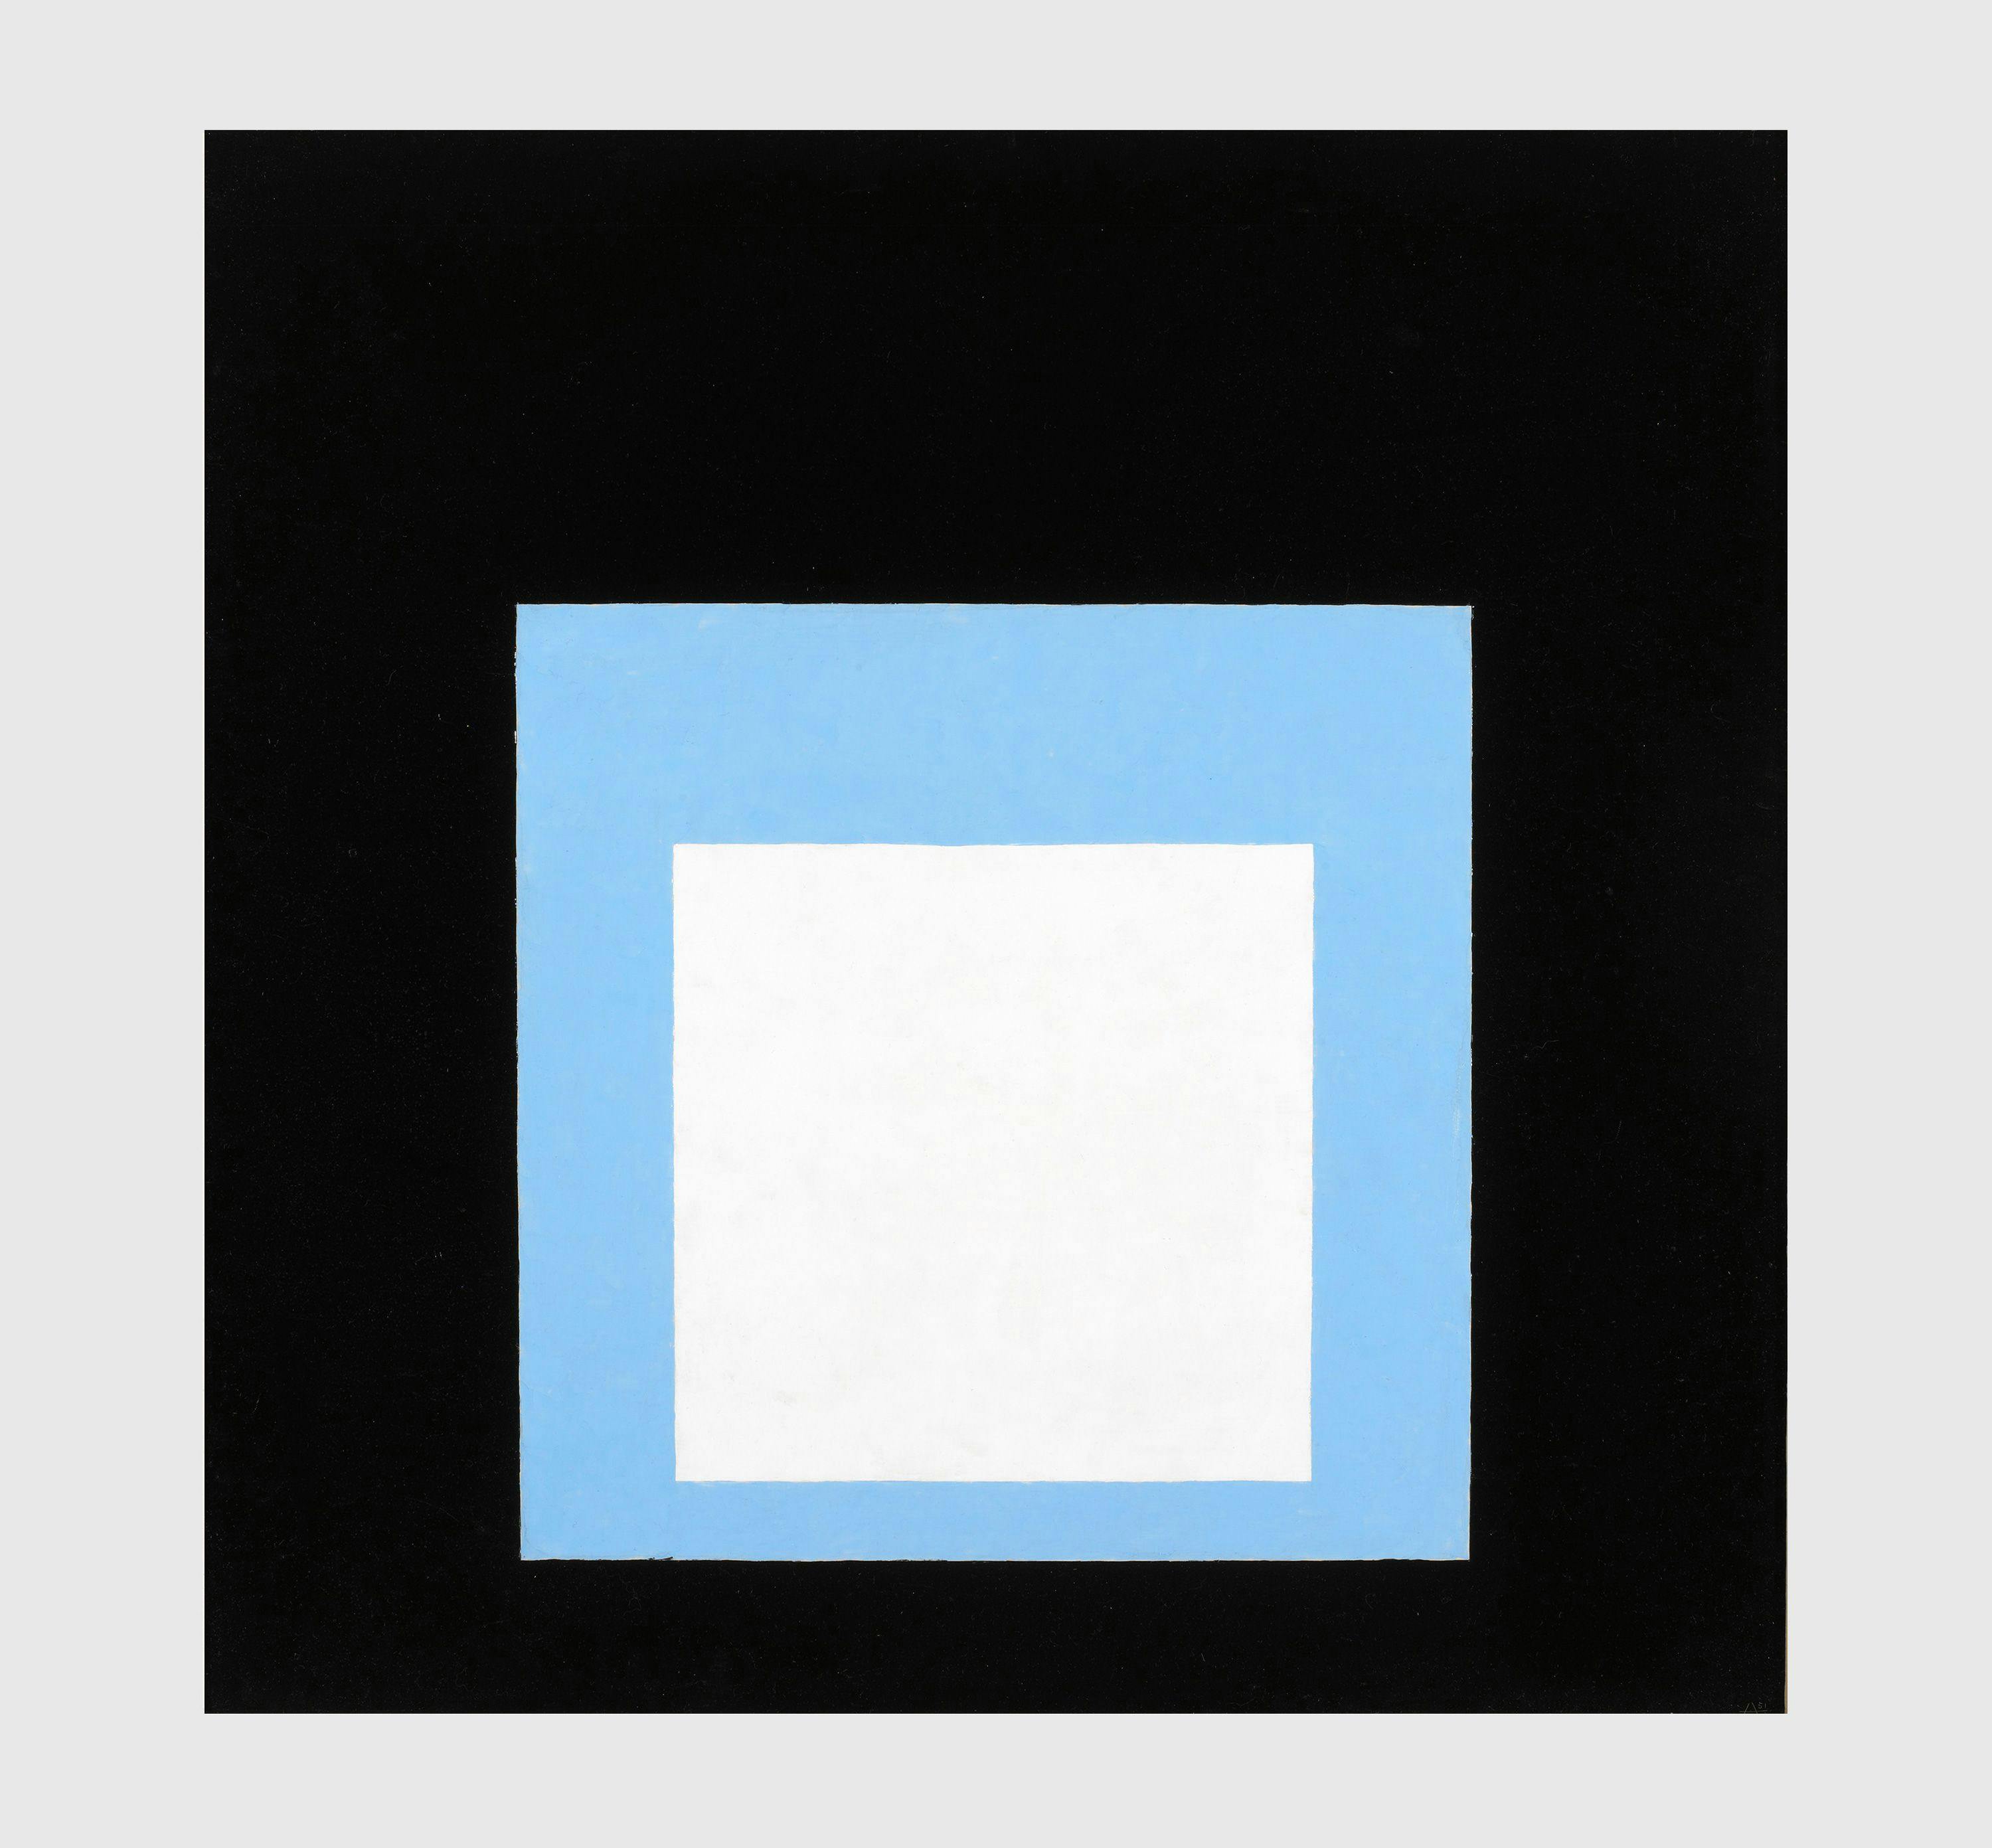 A painting by Josef Albers, titled Homage to the Square: Black Setting, dated 1951.